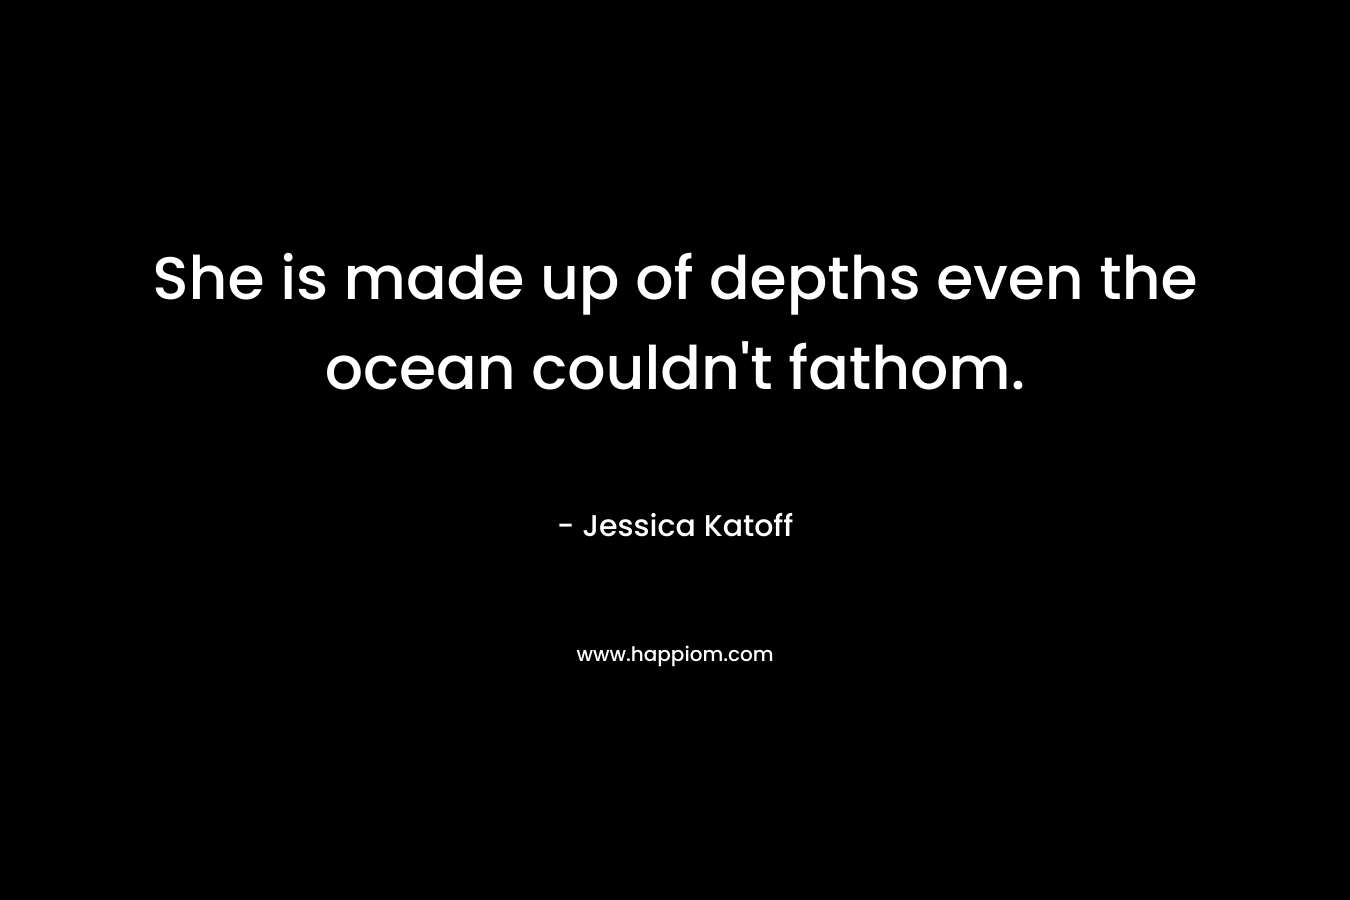 She is made up of depths even the ocean couldn’t fathom. – Jessica Katoff